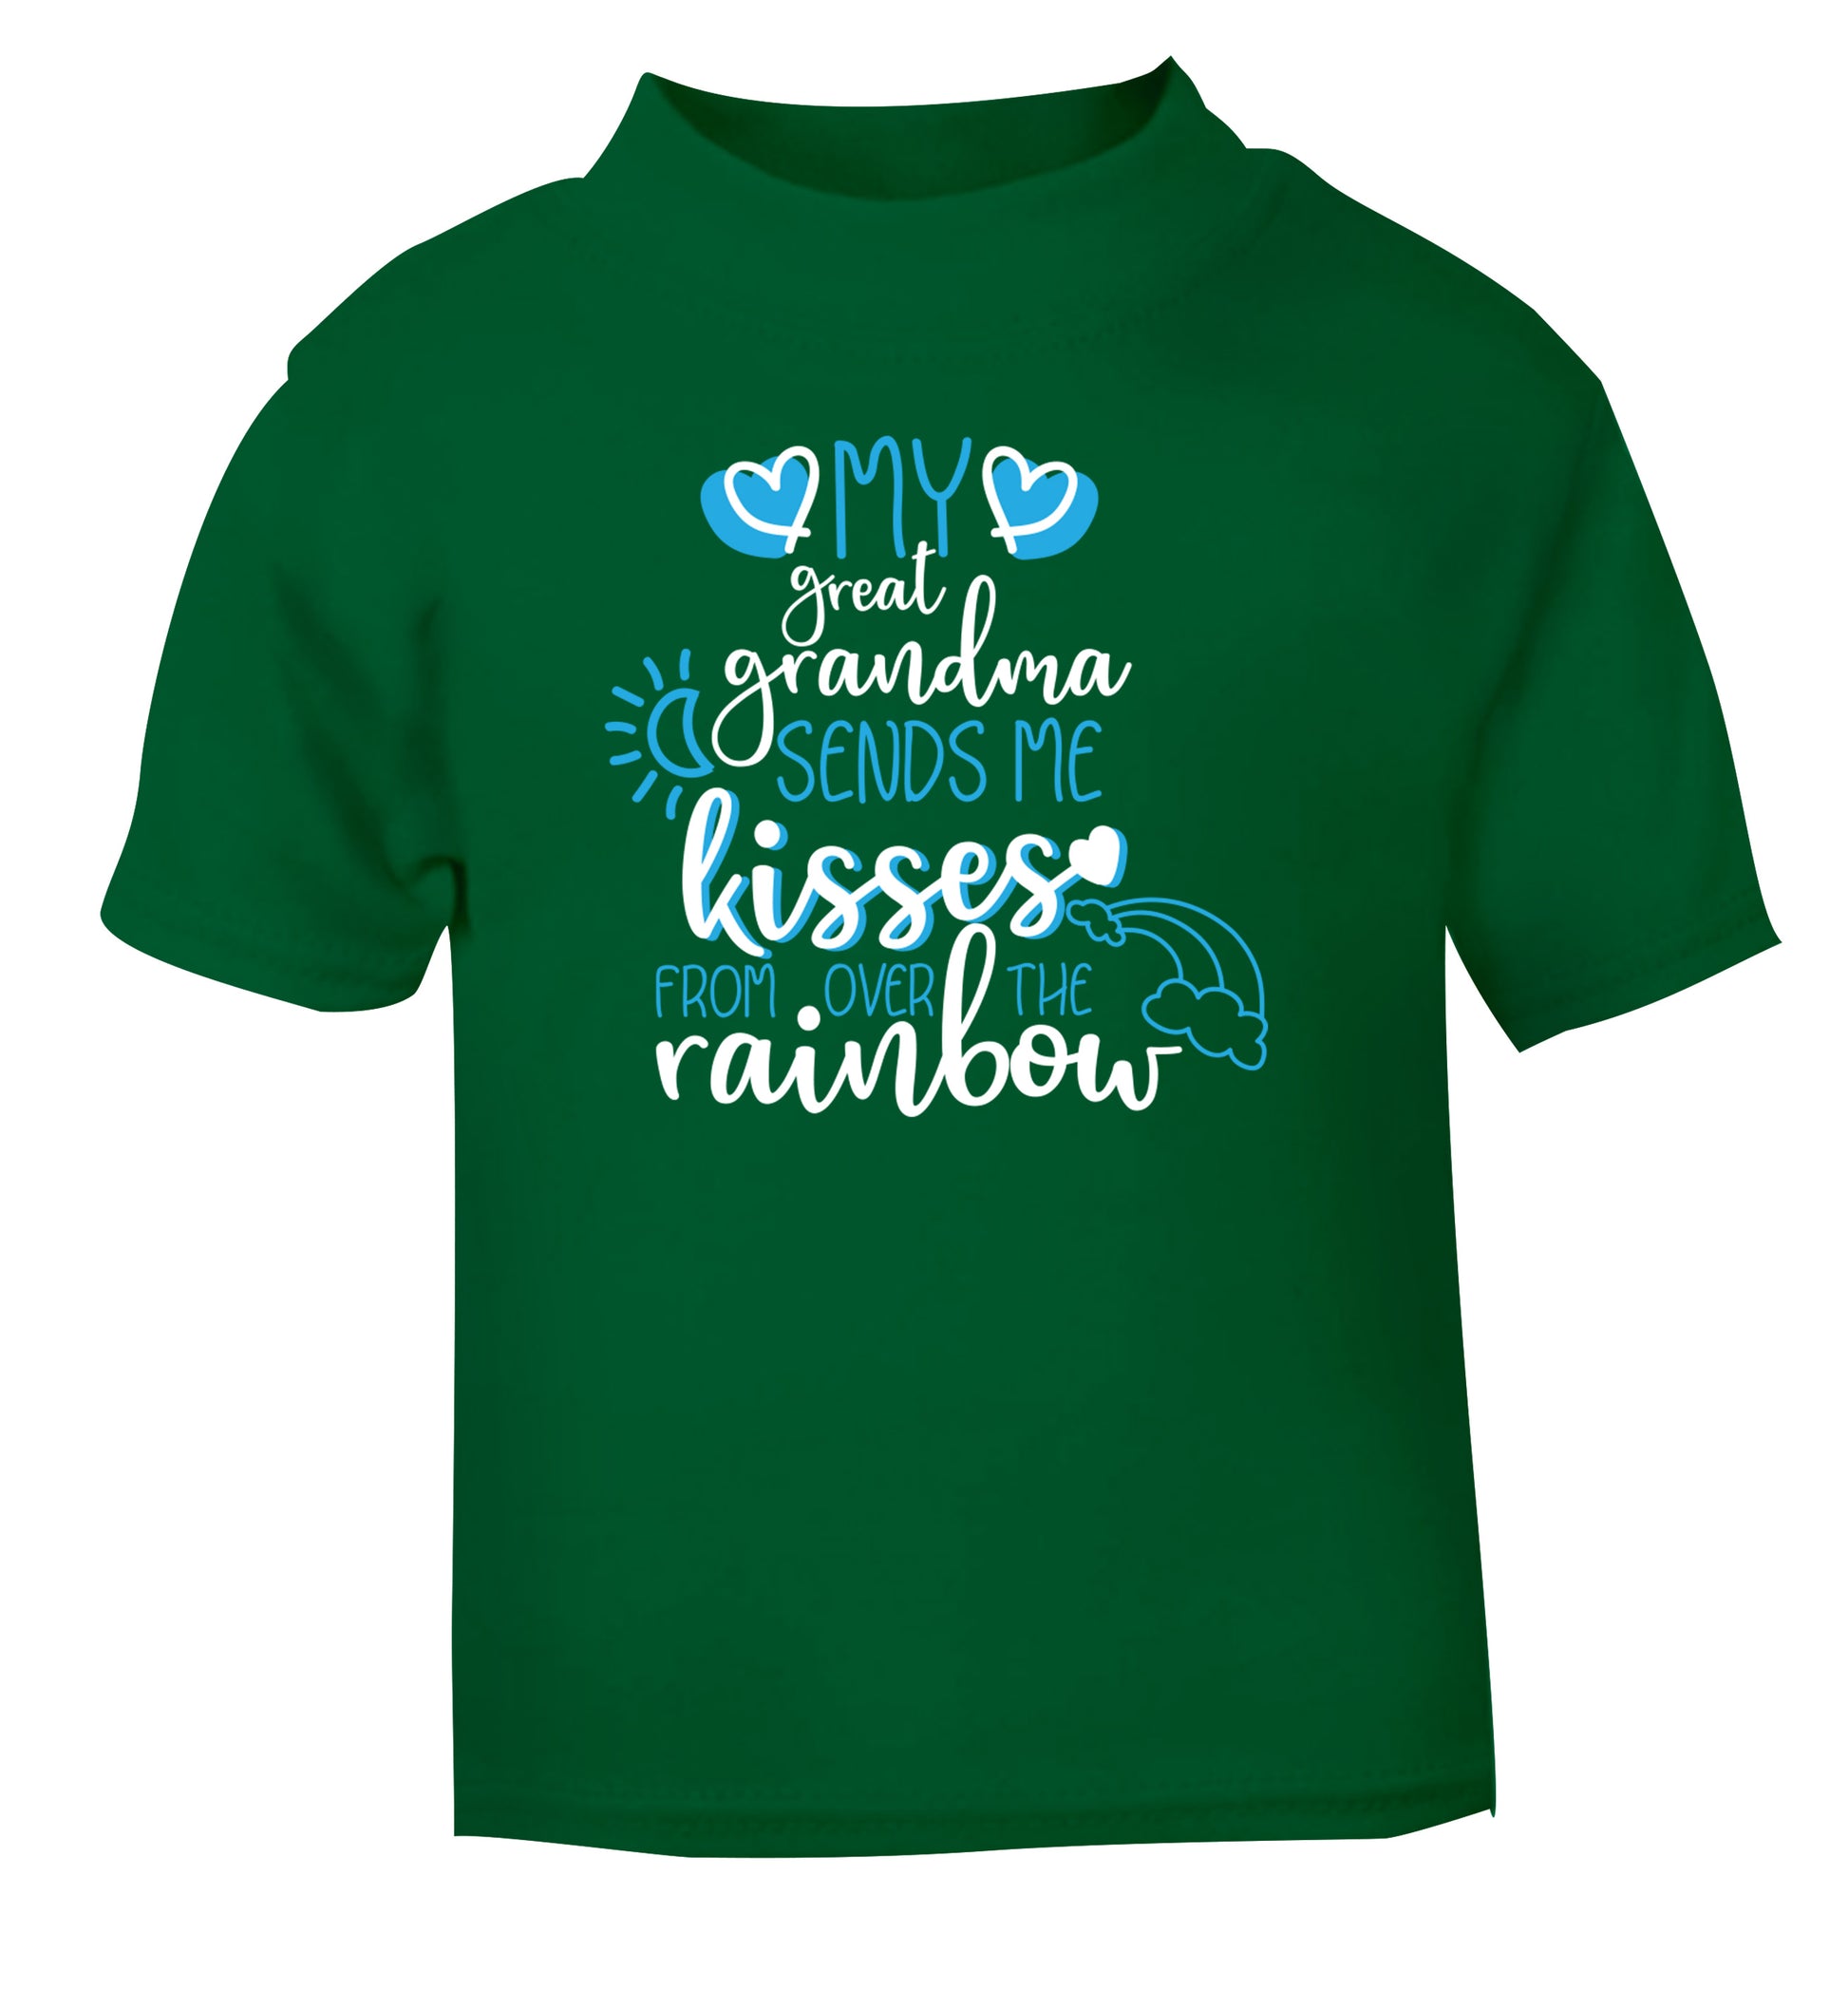 My great grandma sends me kisses from over the rainbow green Baby Toddler Tshirt 2 Years